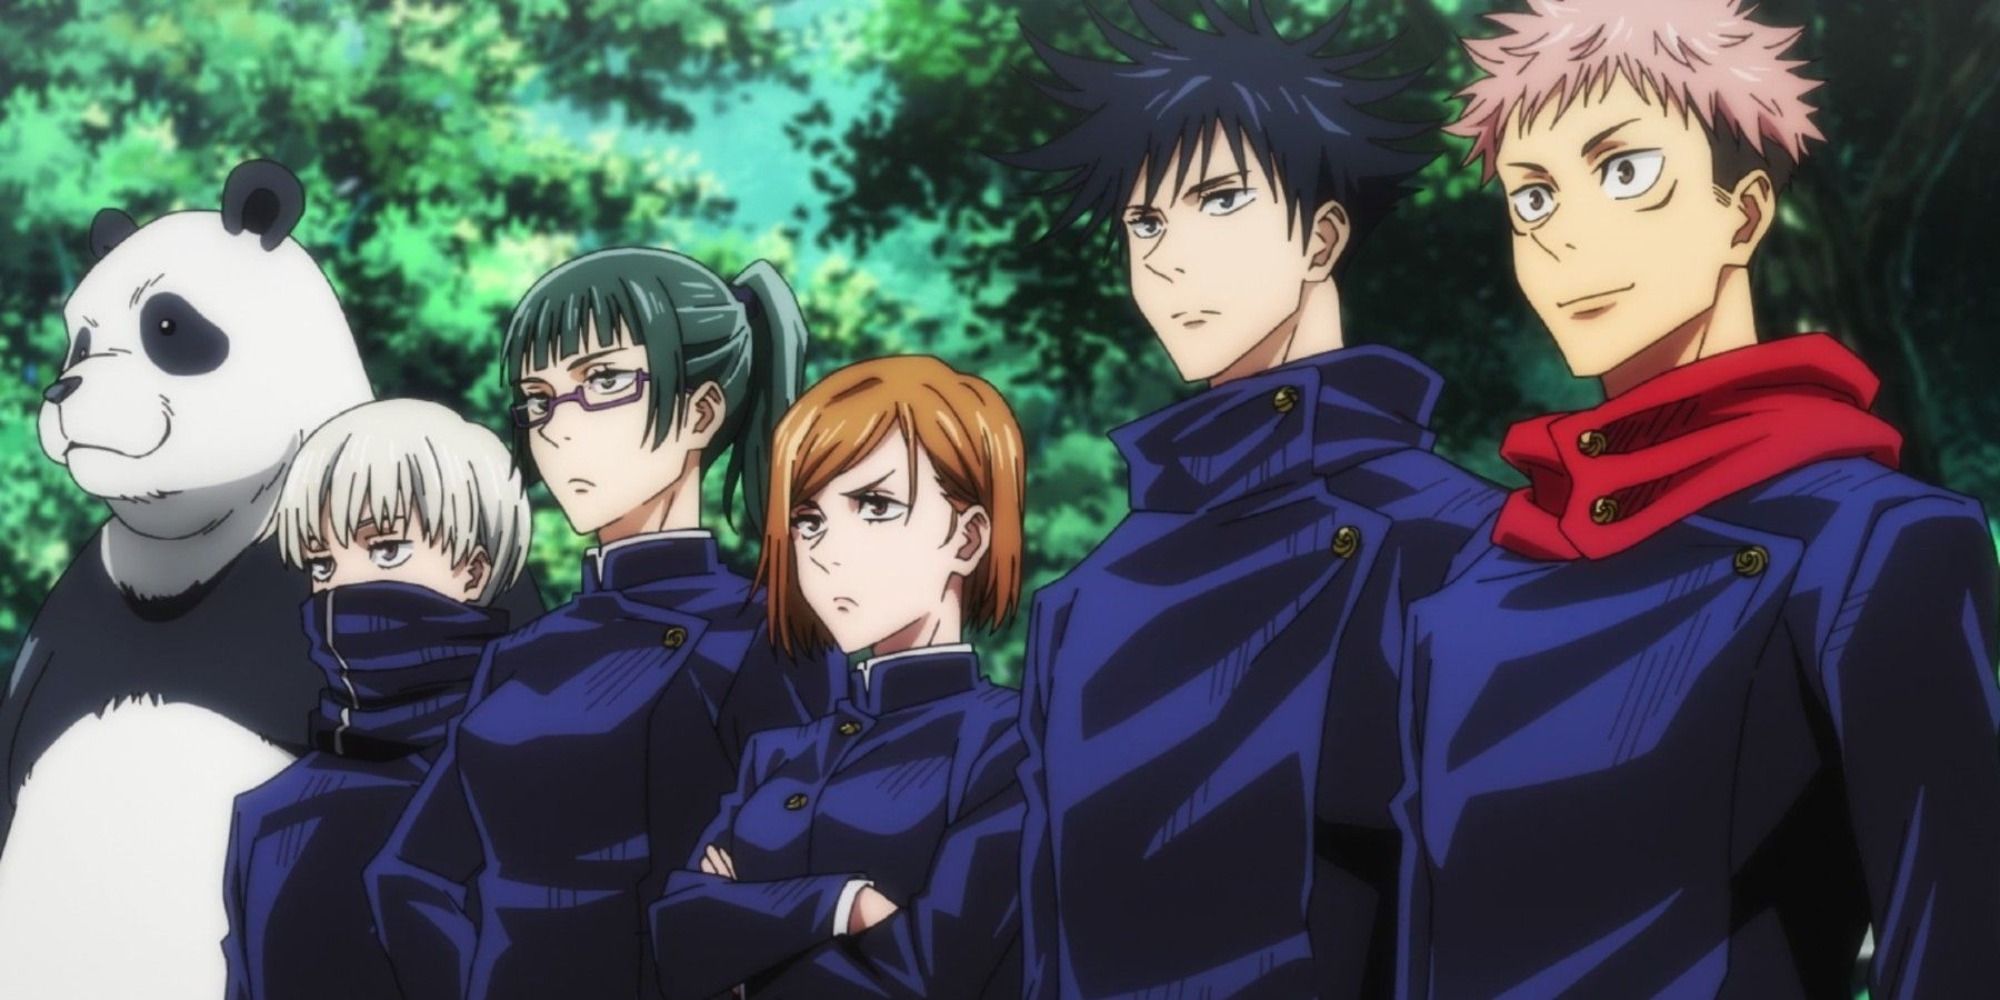 A scene of two teams standing next to each other in the anime Jujutsu Kaisen